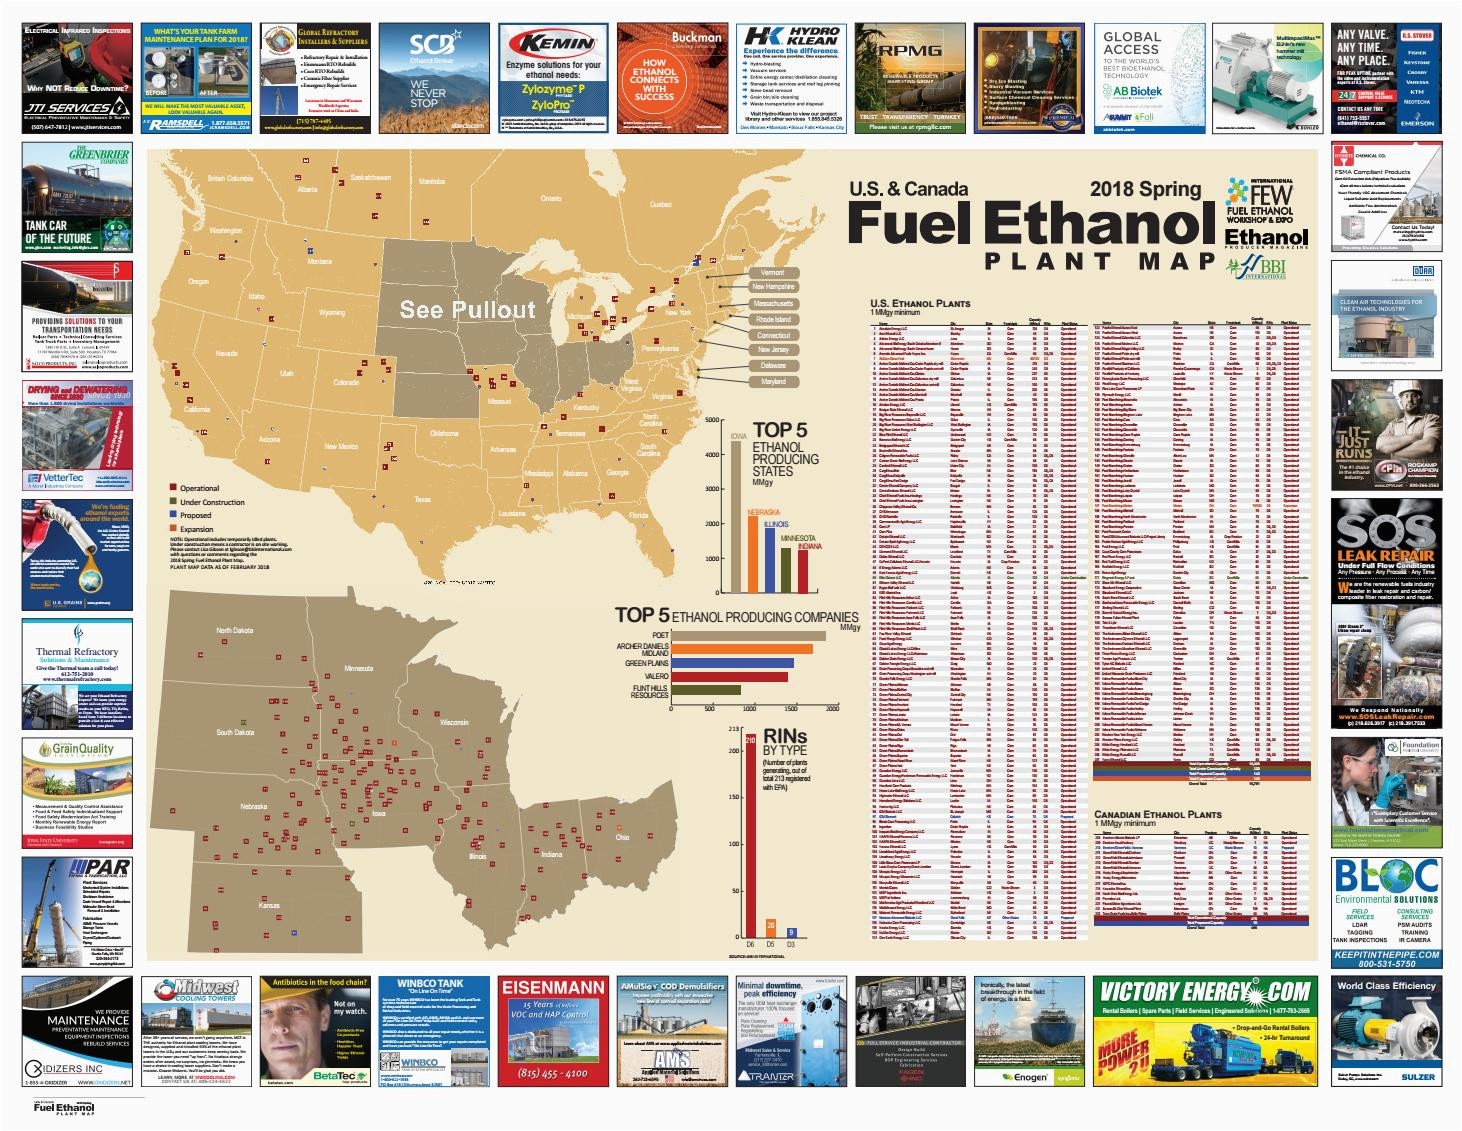 Minnesota Power Plants Map Spring 2018 U S and Canada Fuel Ethanol Plant Map by Bbi